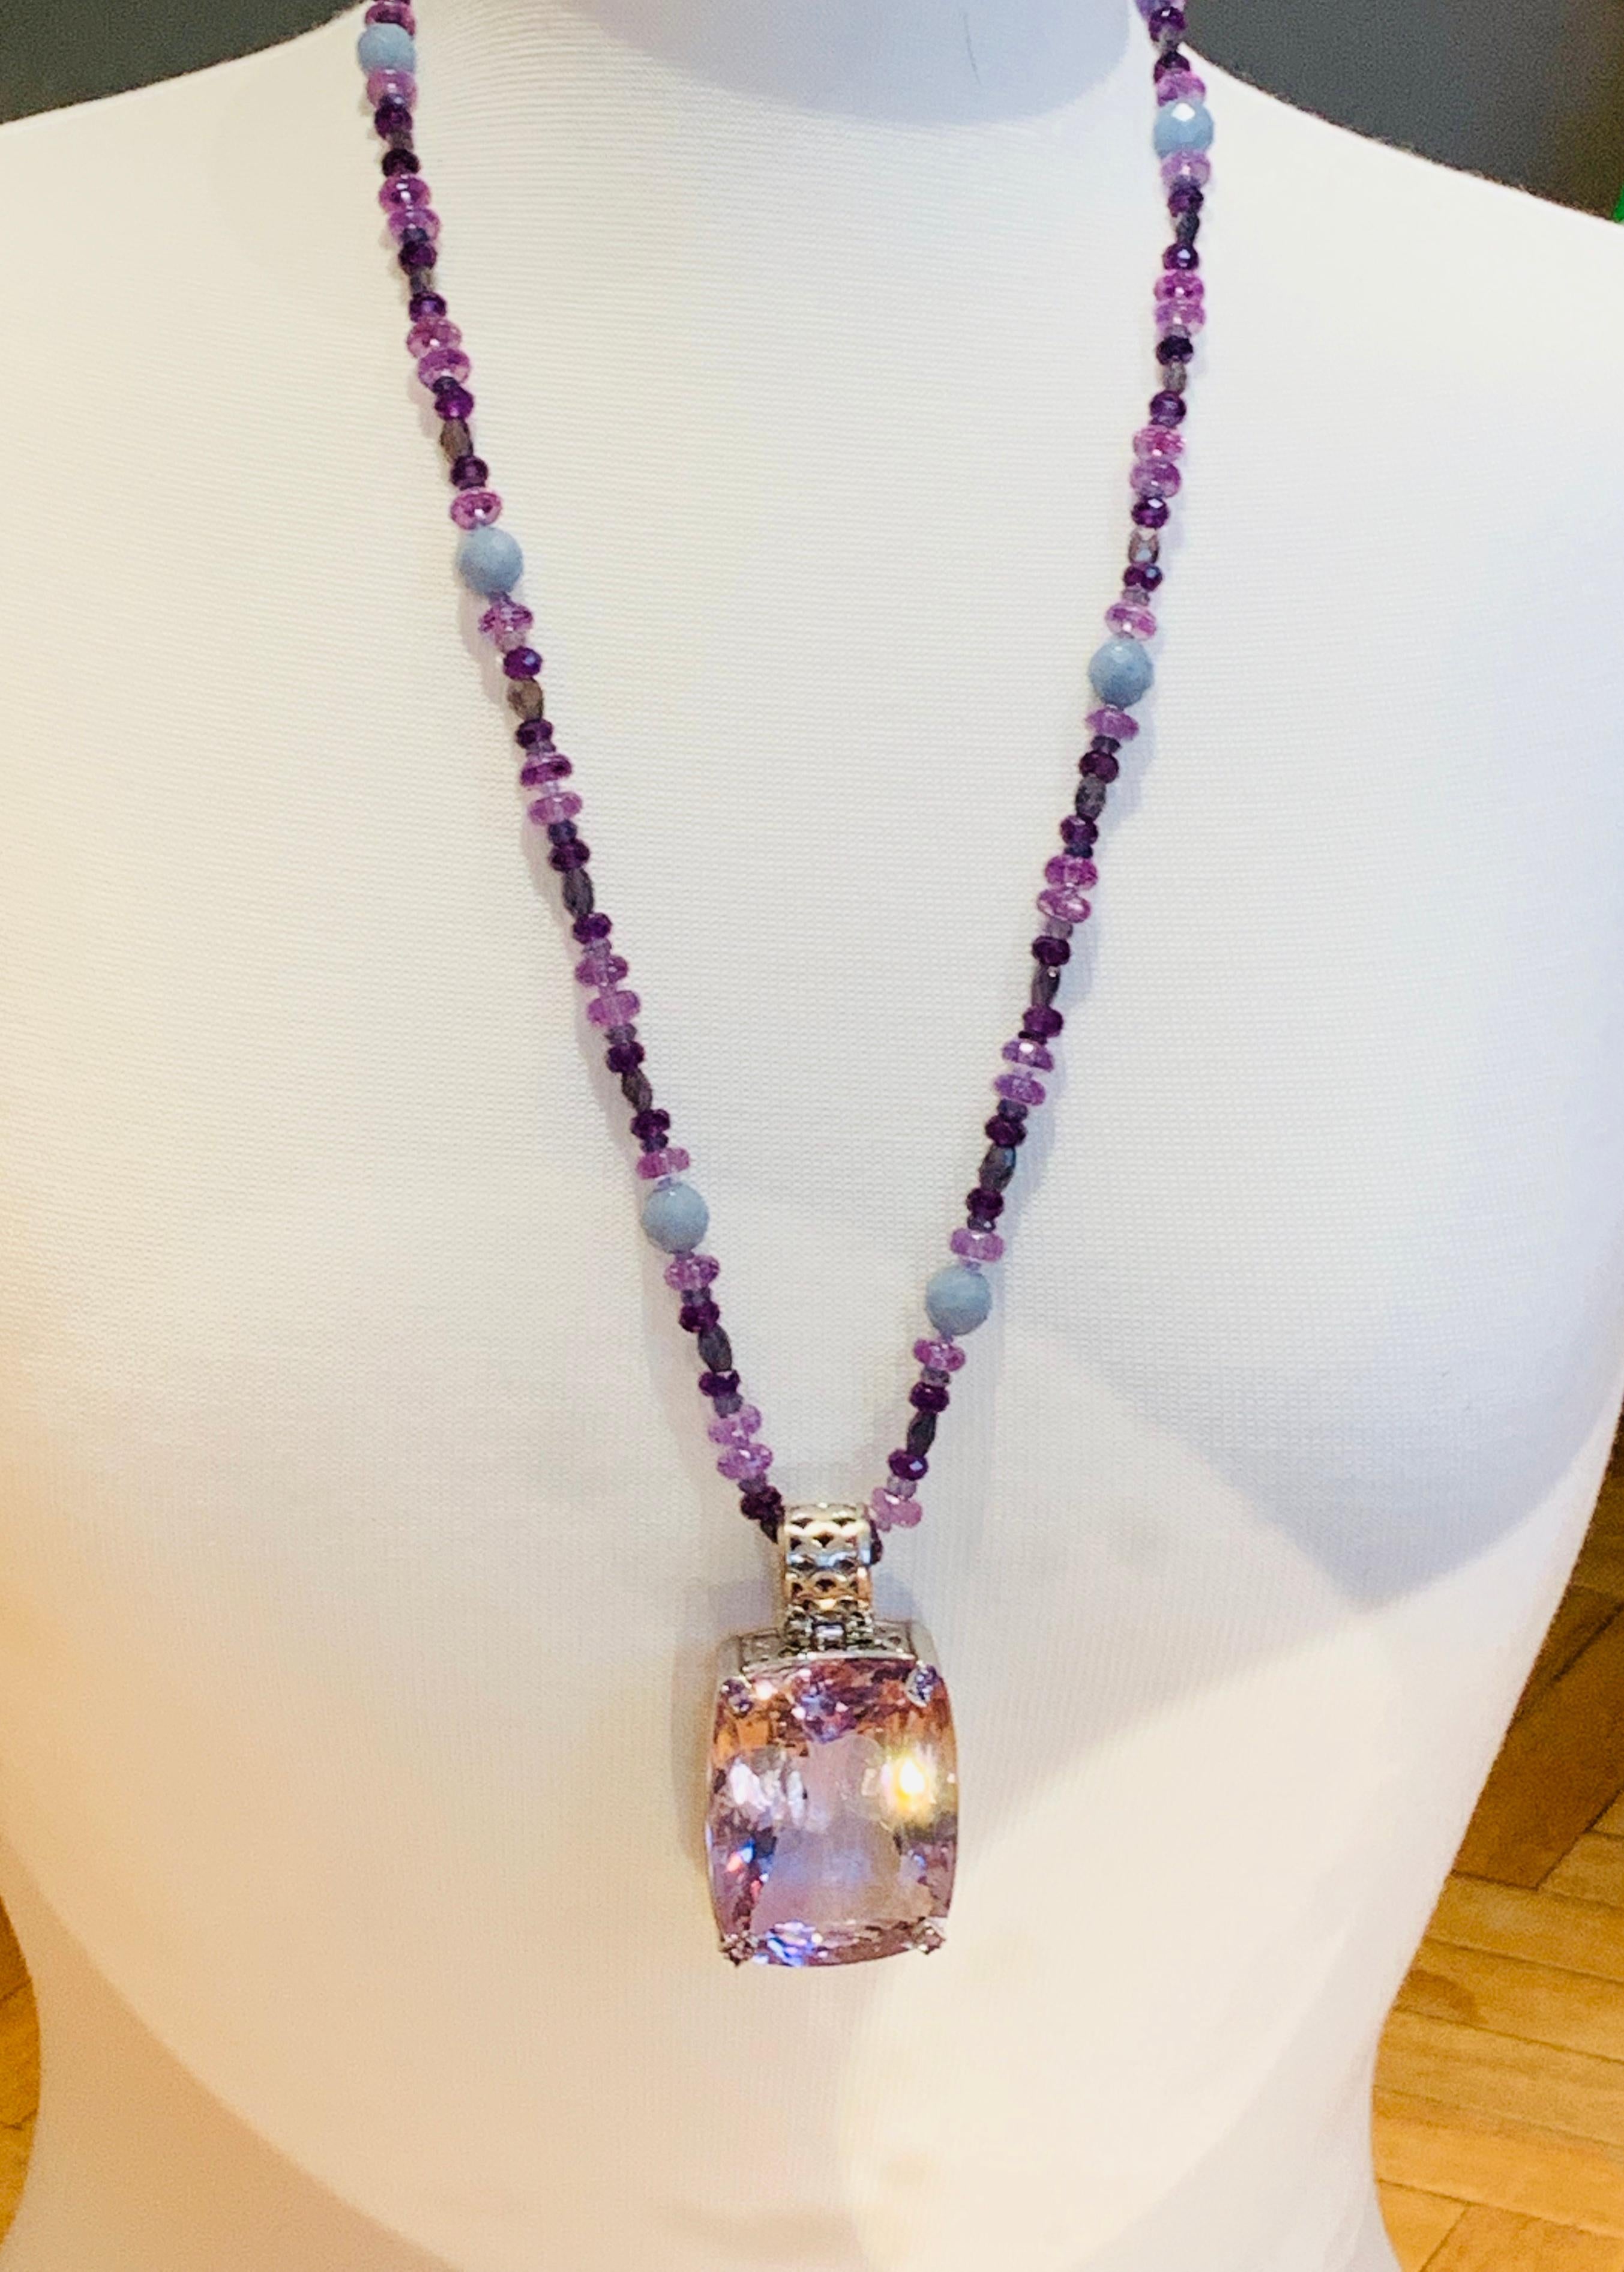 257.55 Carat Natural Brazilian Amethyst with Tanzanite Pendant Necklace For Sale 2